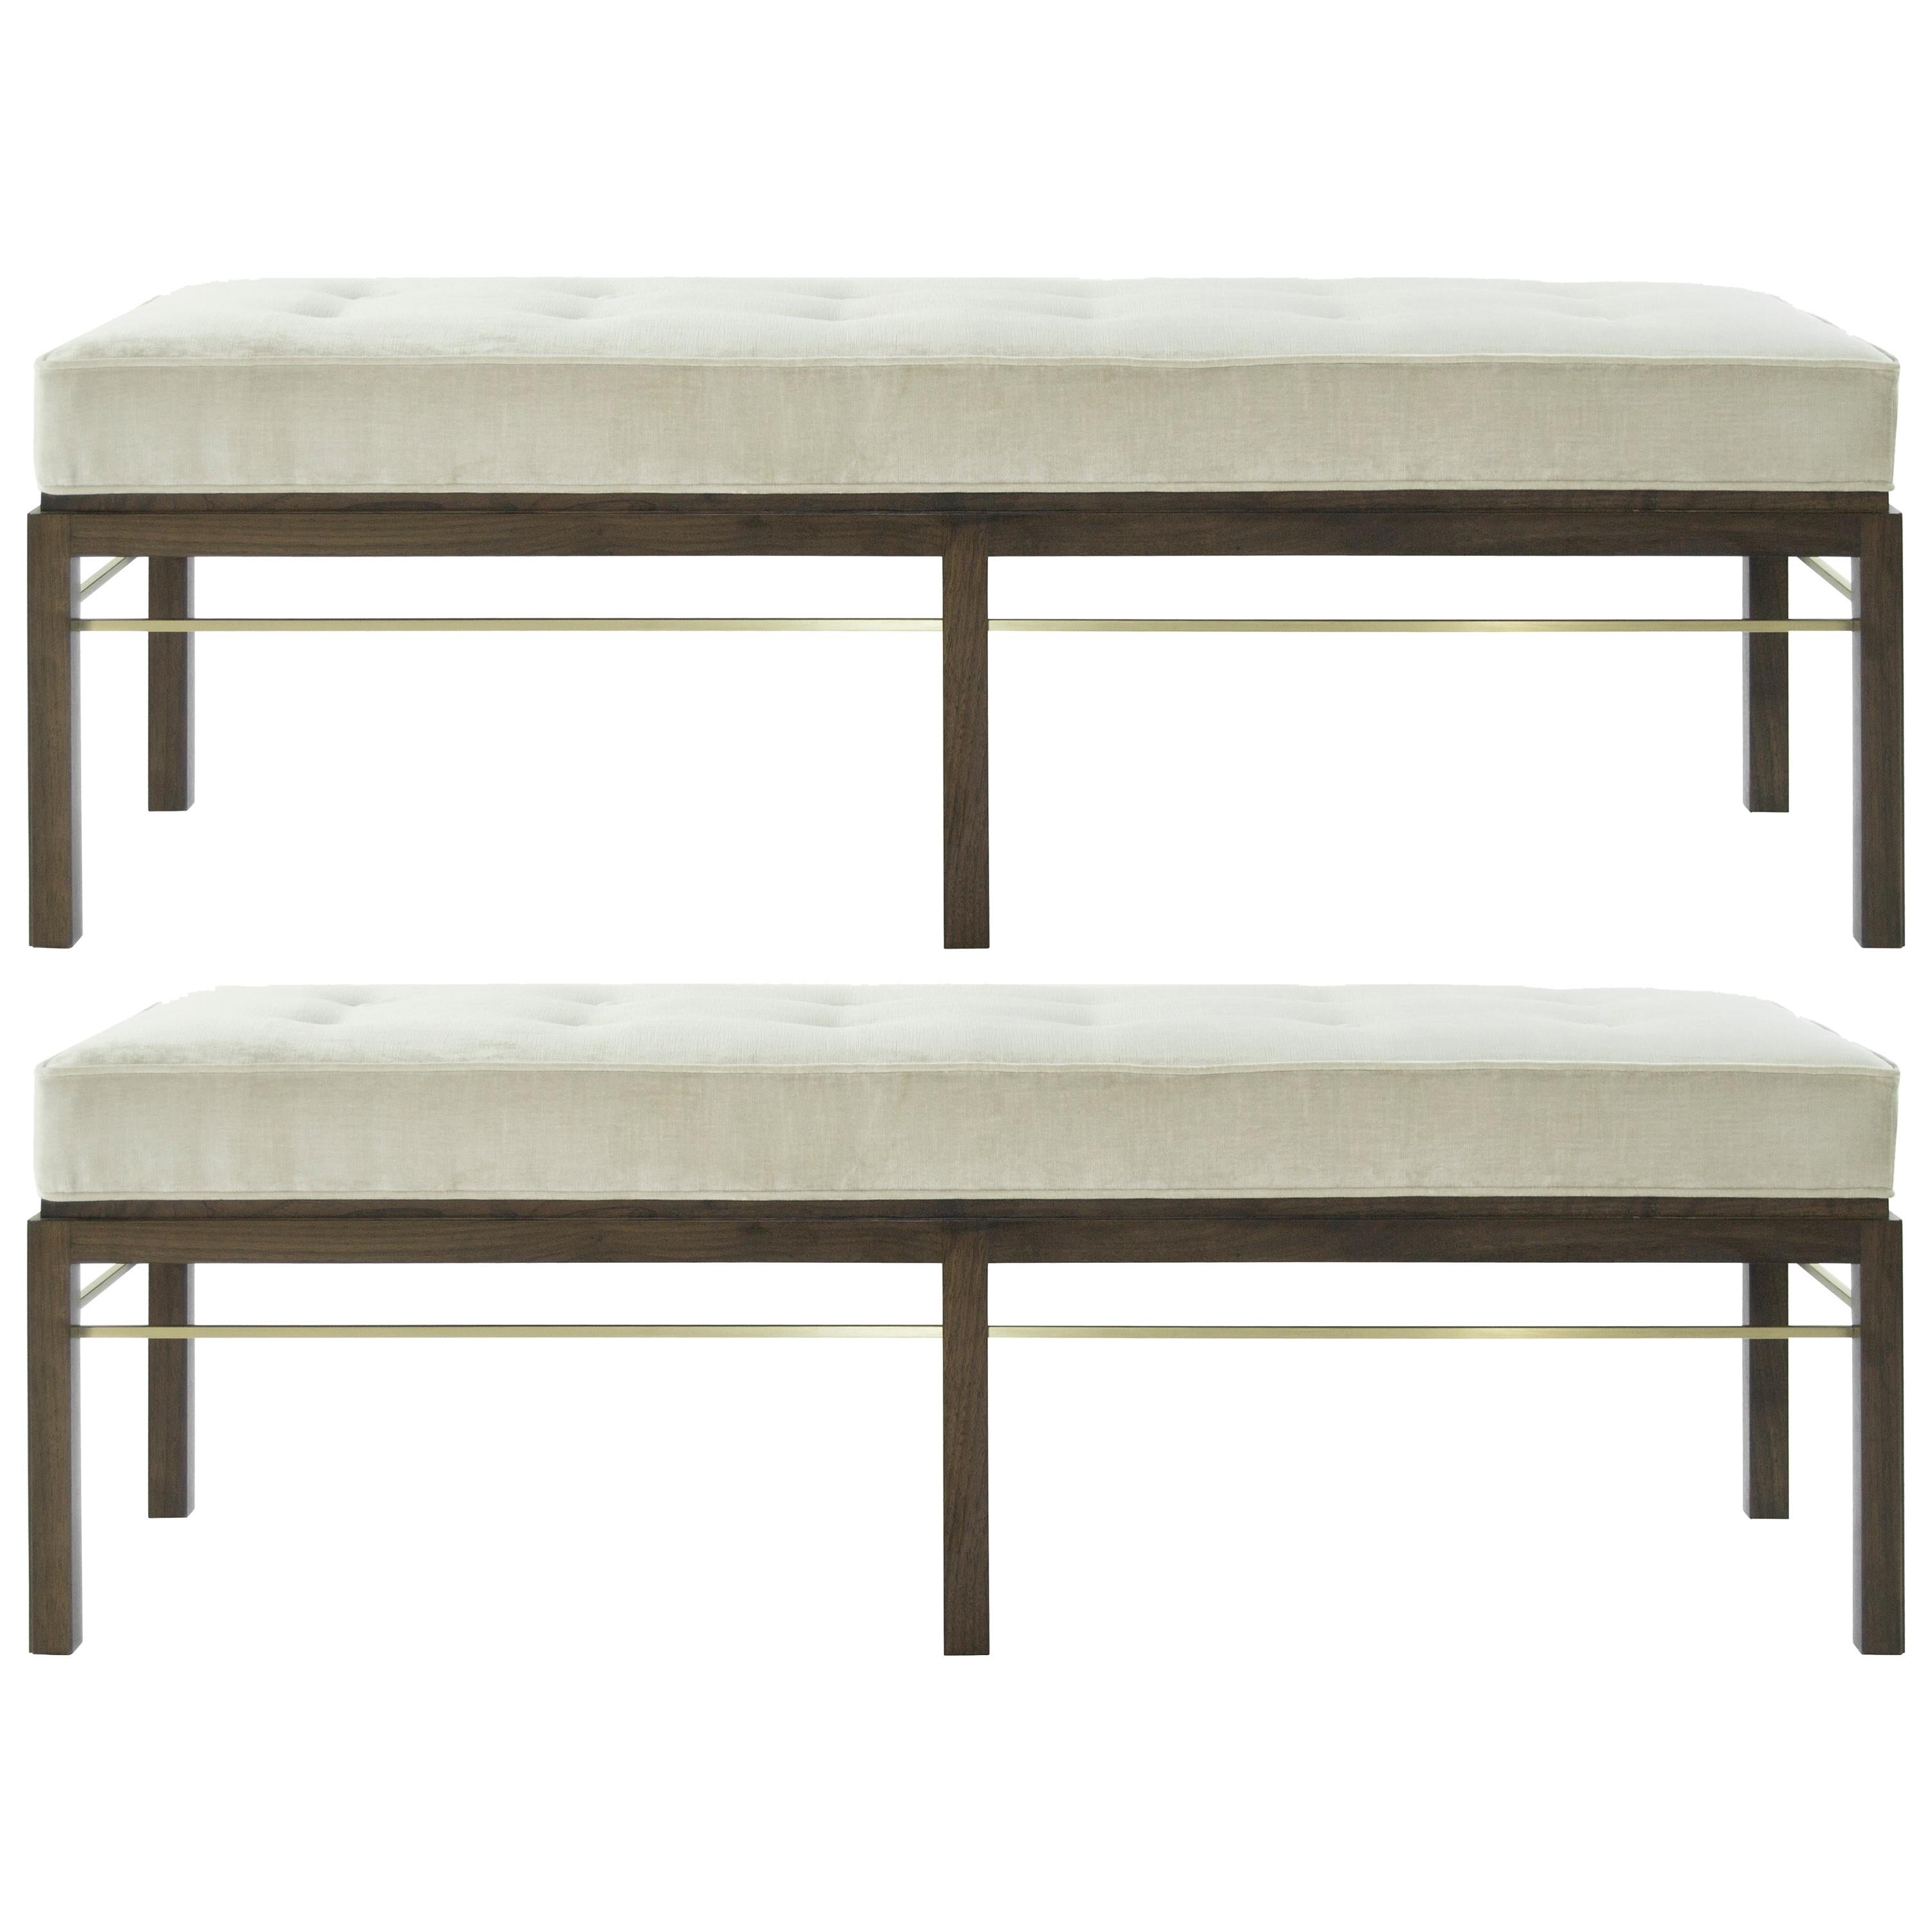 Set of Edward Wormley for Dunbar Brass Stretcher Benches, 1950s